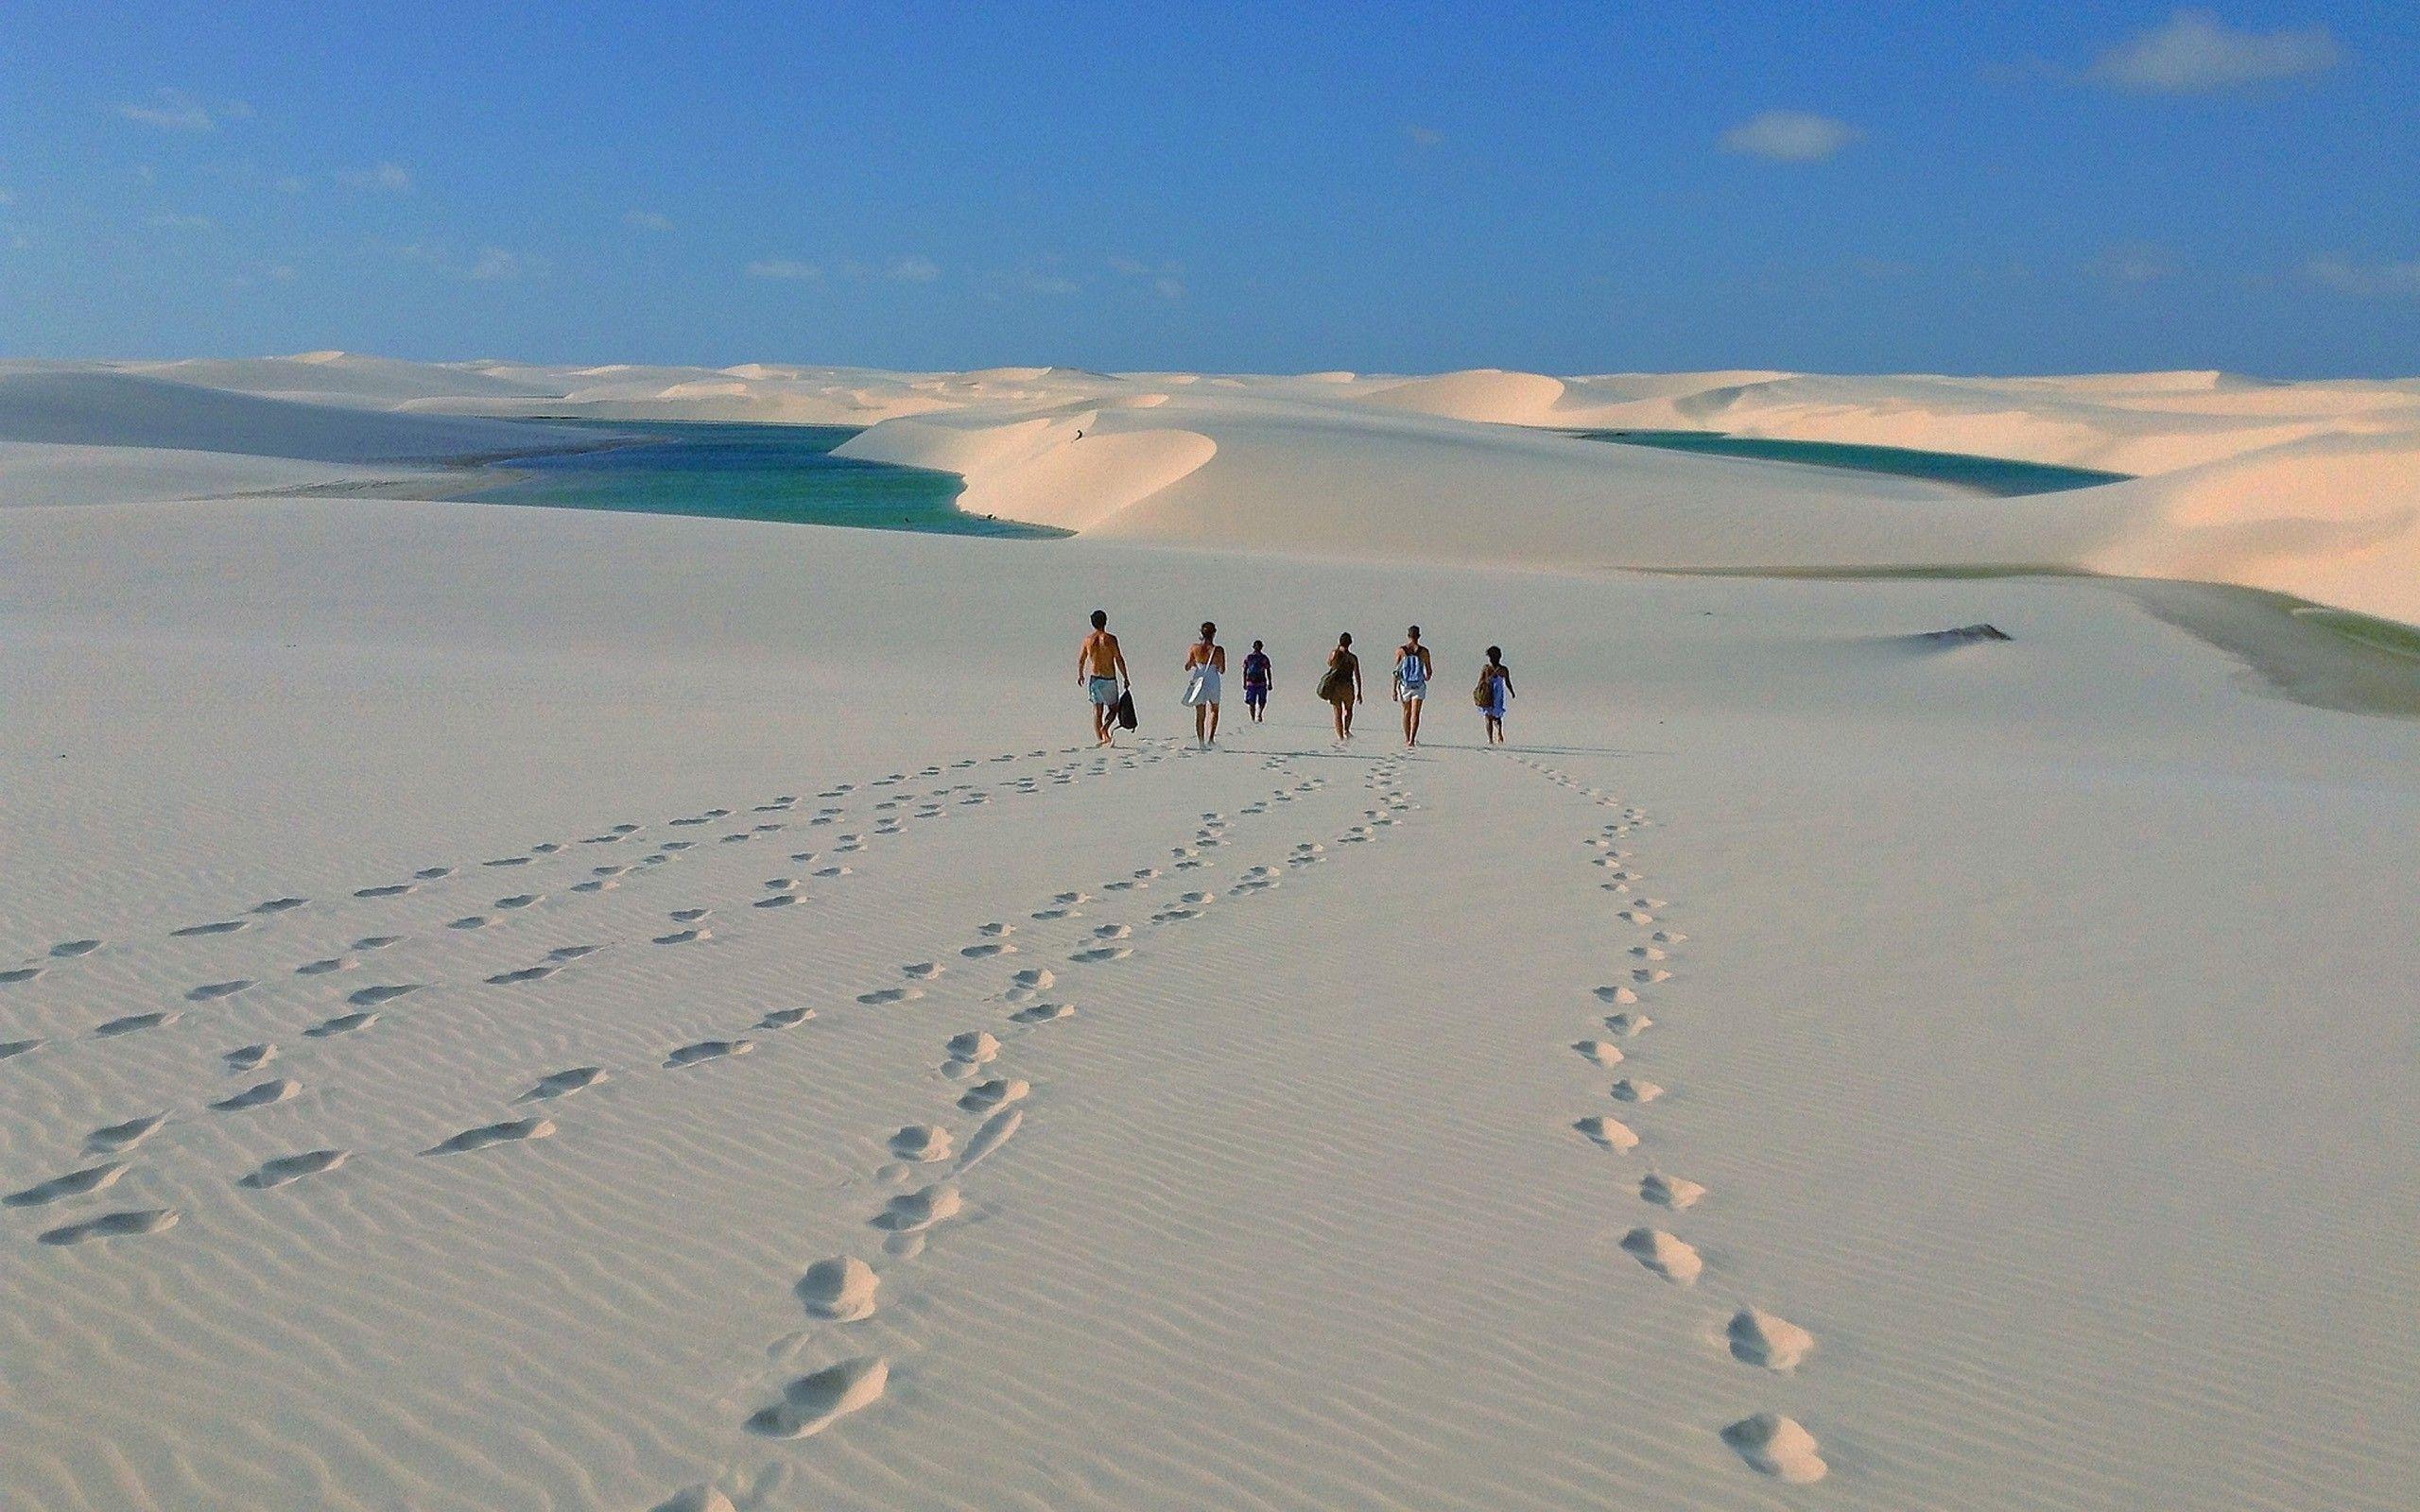 Footprints in the sand in Brazil wallpapers and image